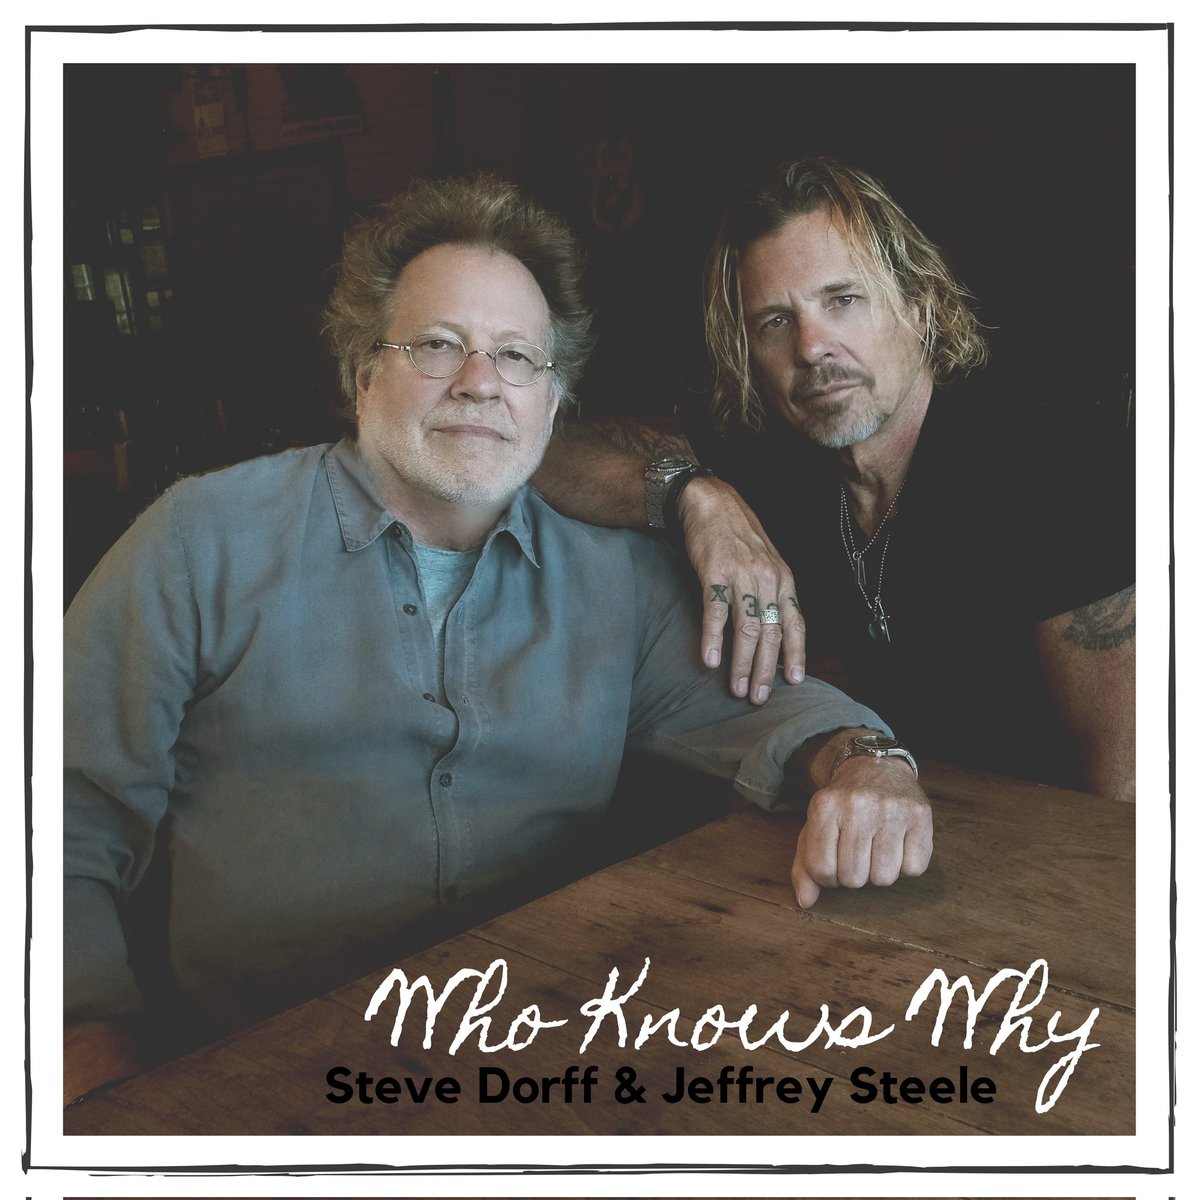 'Who Knows Why' Steve Dorff & Jeffrey Steele a tribute...coming 9/23/22 pre-save link: vydia.lnk.to/WhoKnowsWhy Written & Produced by Steve Dorff & Jeffrey Steele Photography Anthony Scarlati Album Design @CRLwrites